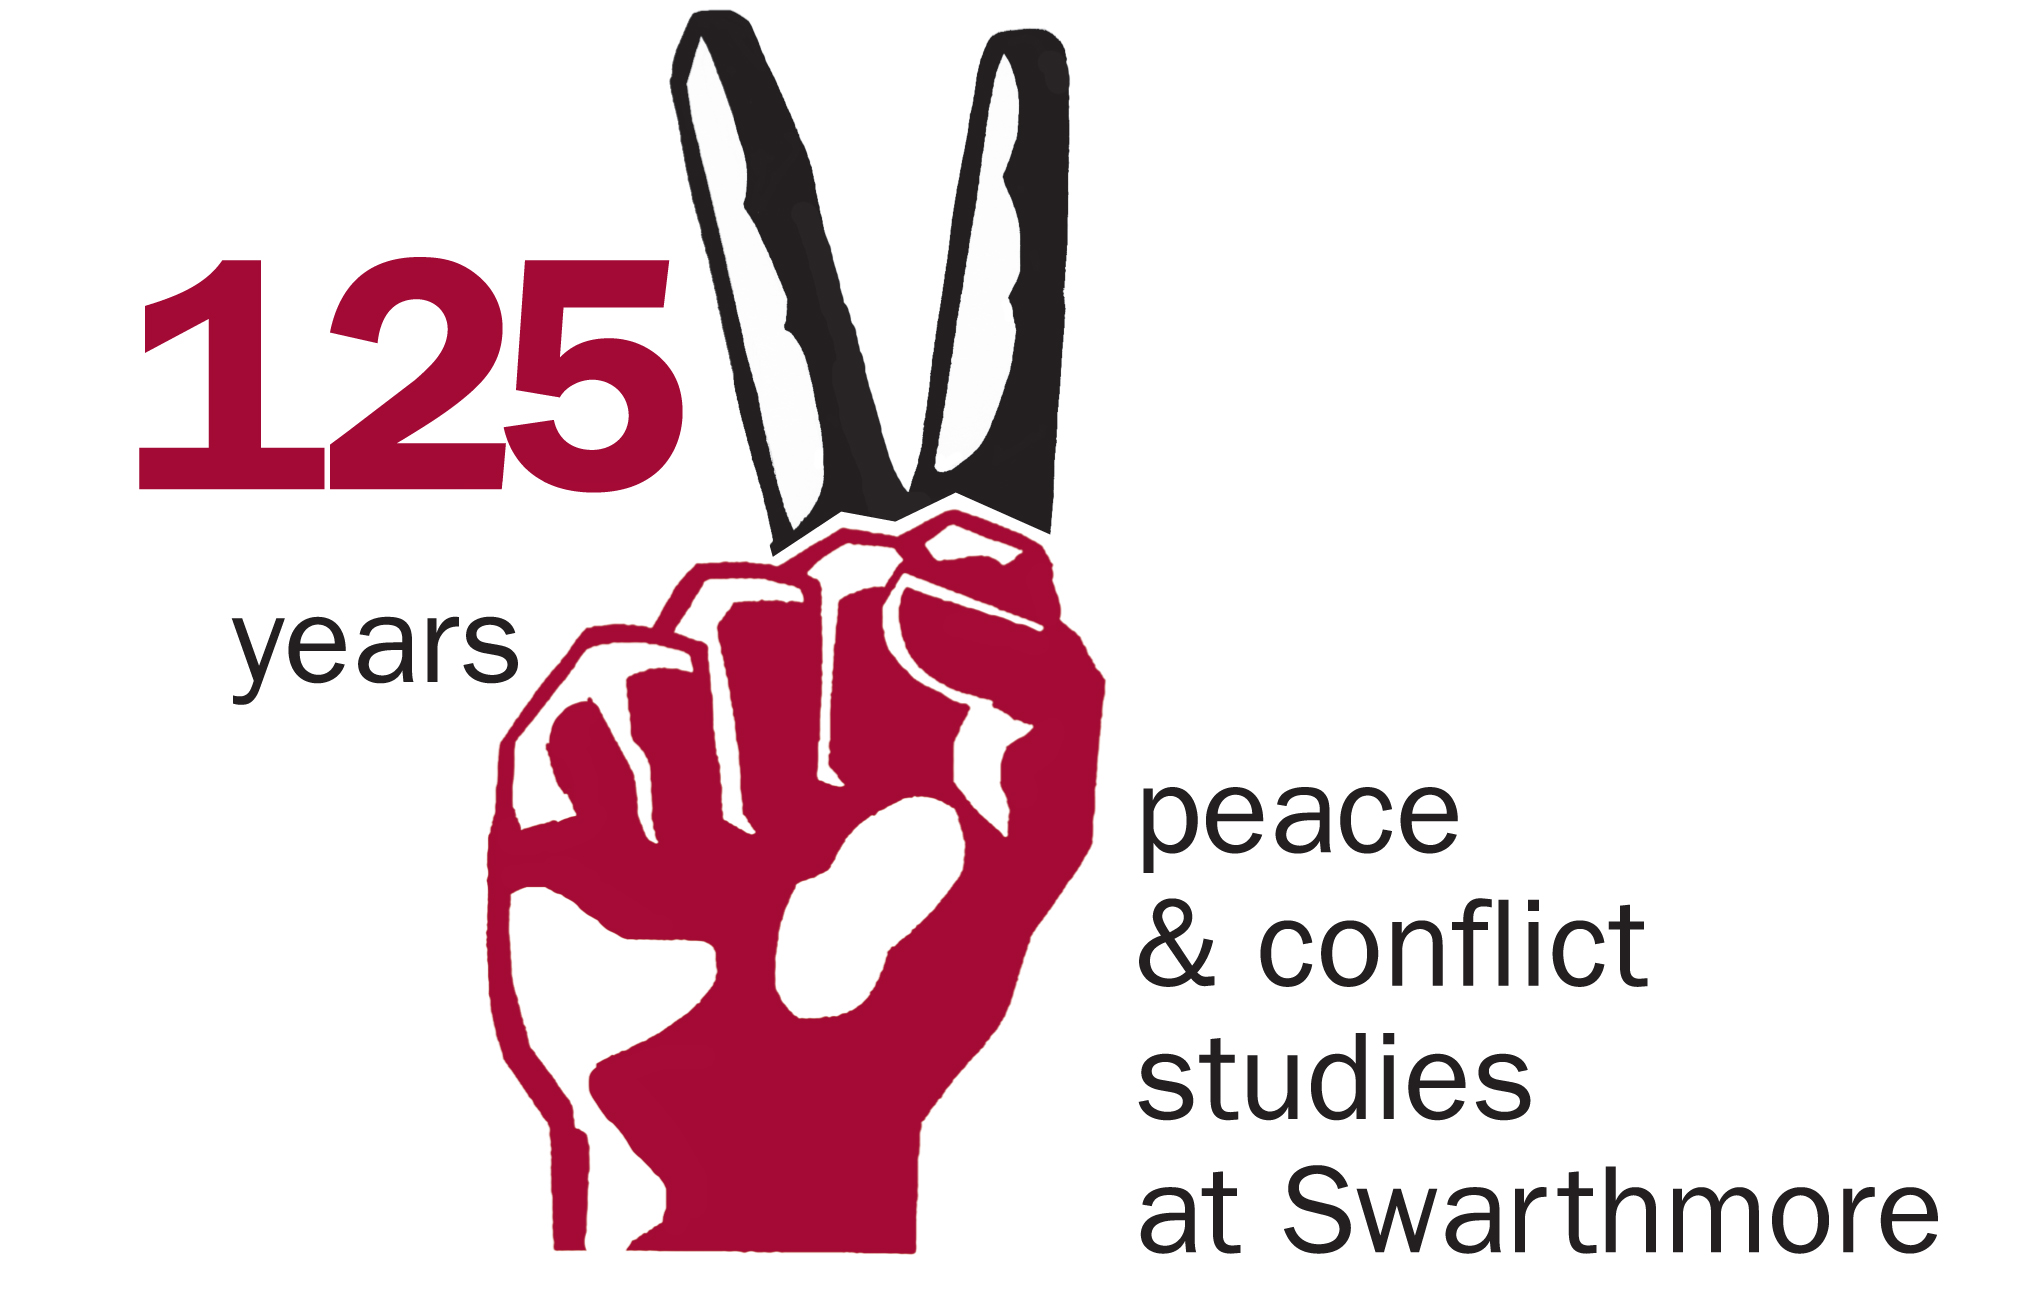 125 Years of Peace and Conflict Studies in Higher Education at